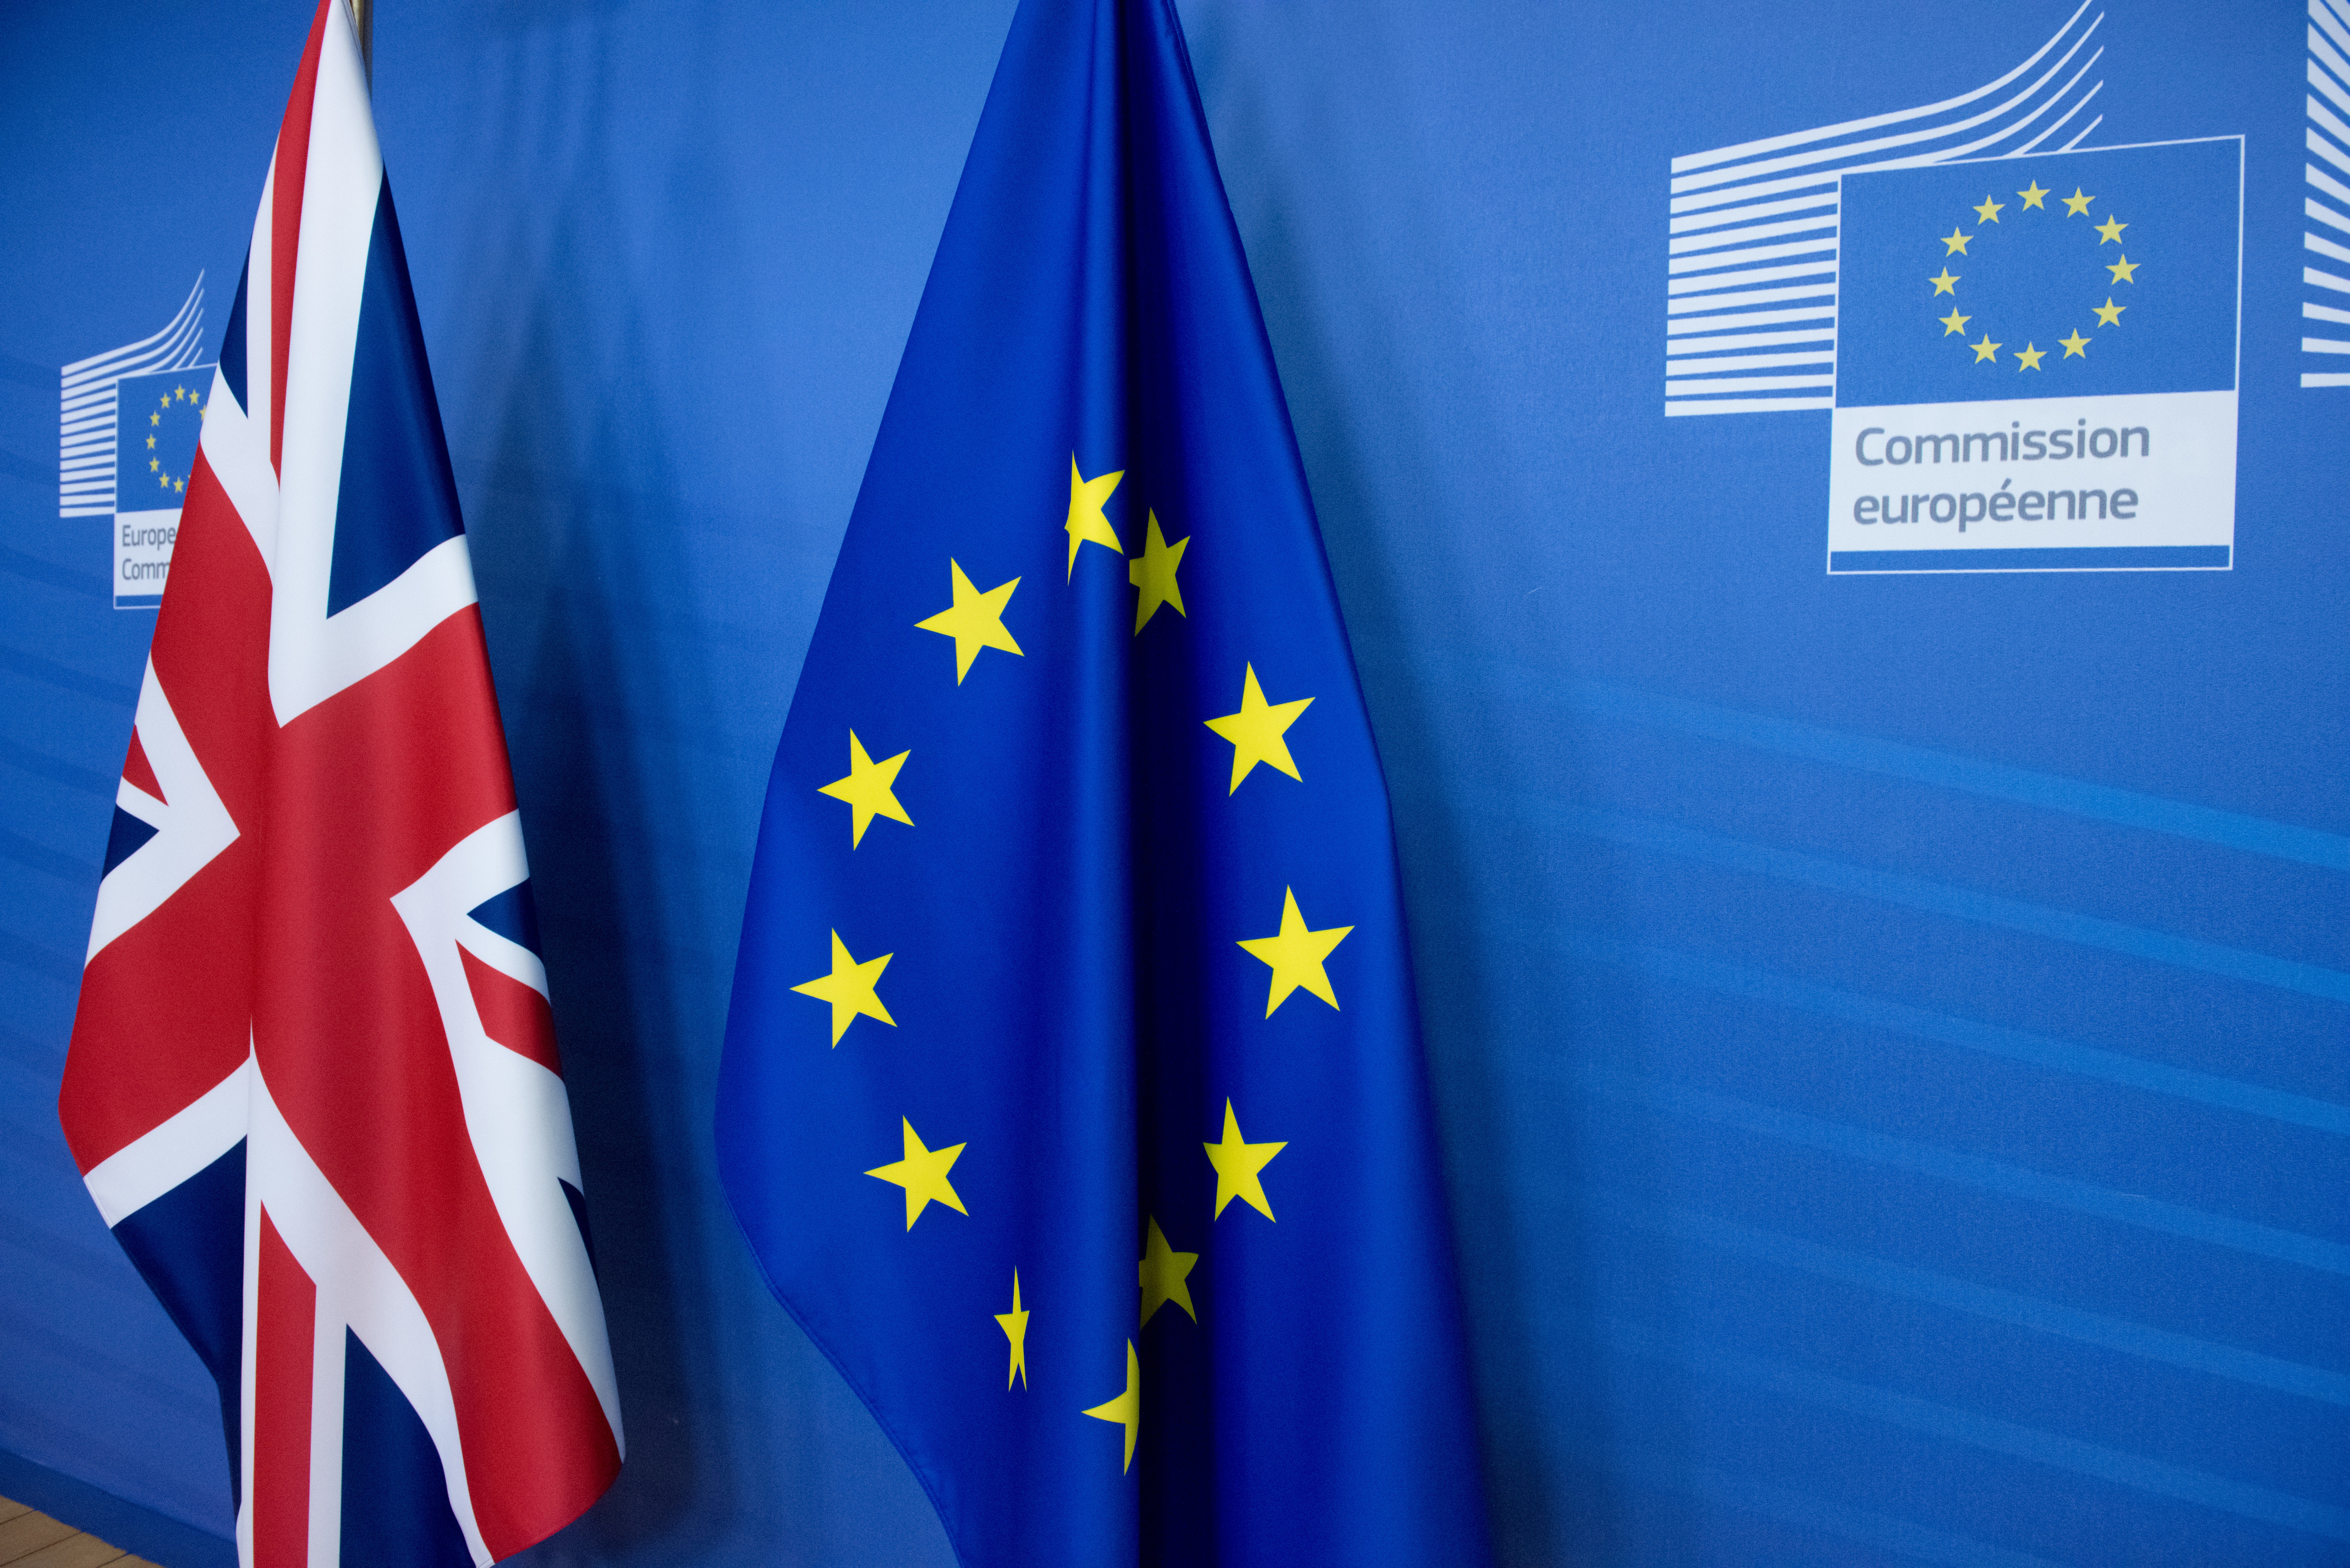 A Union Jack flag beside a European Union one in the EU Commission